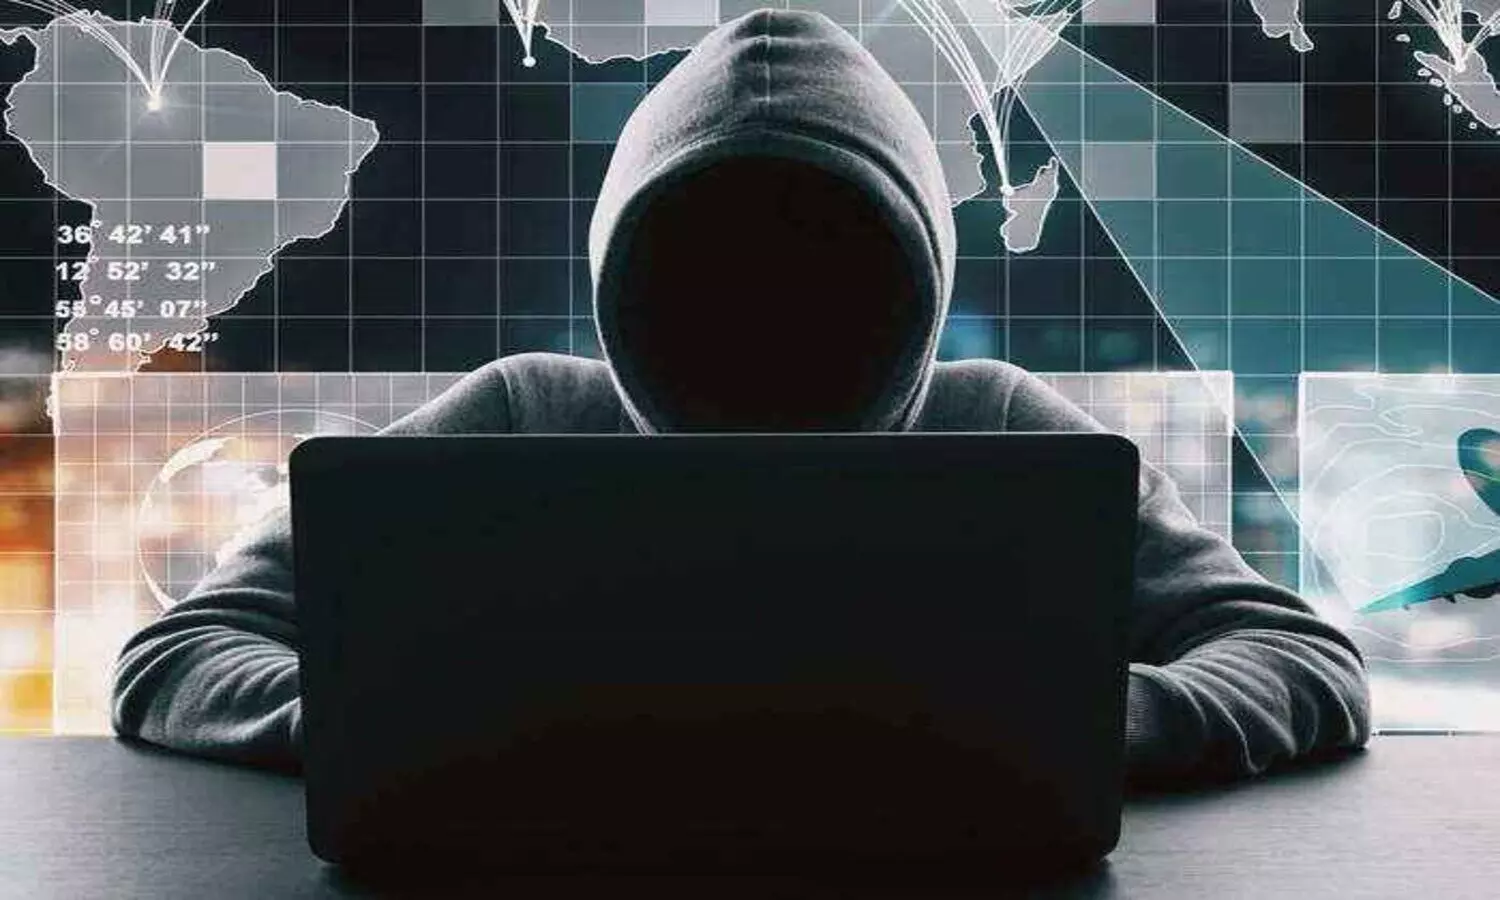 Hackers are targeting bank holders